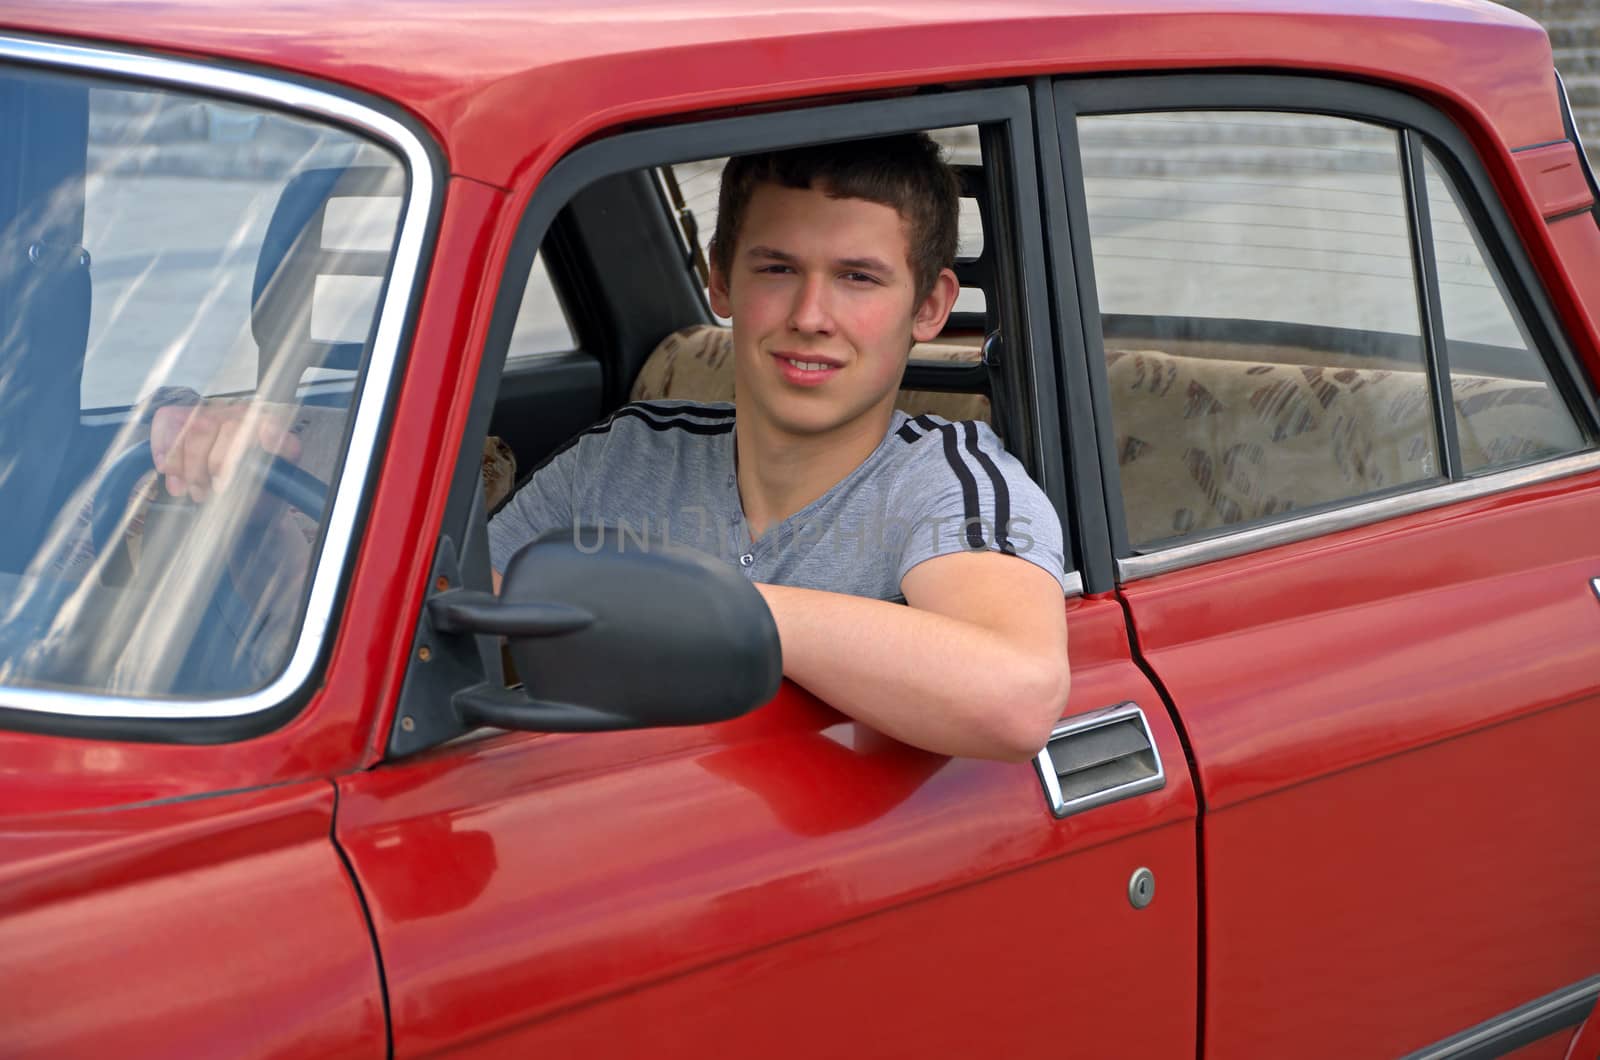 The young man behind the wheel of an old auto 70-80 years of release.